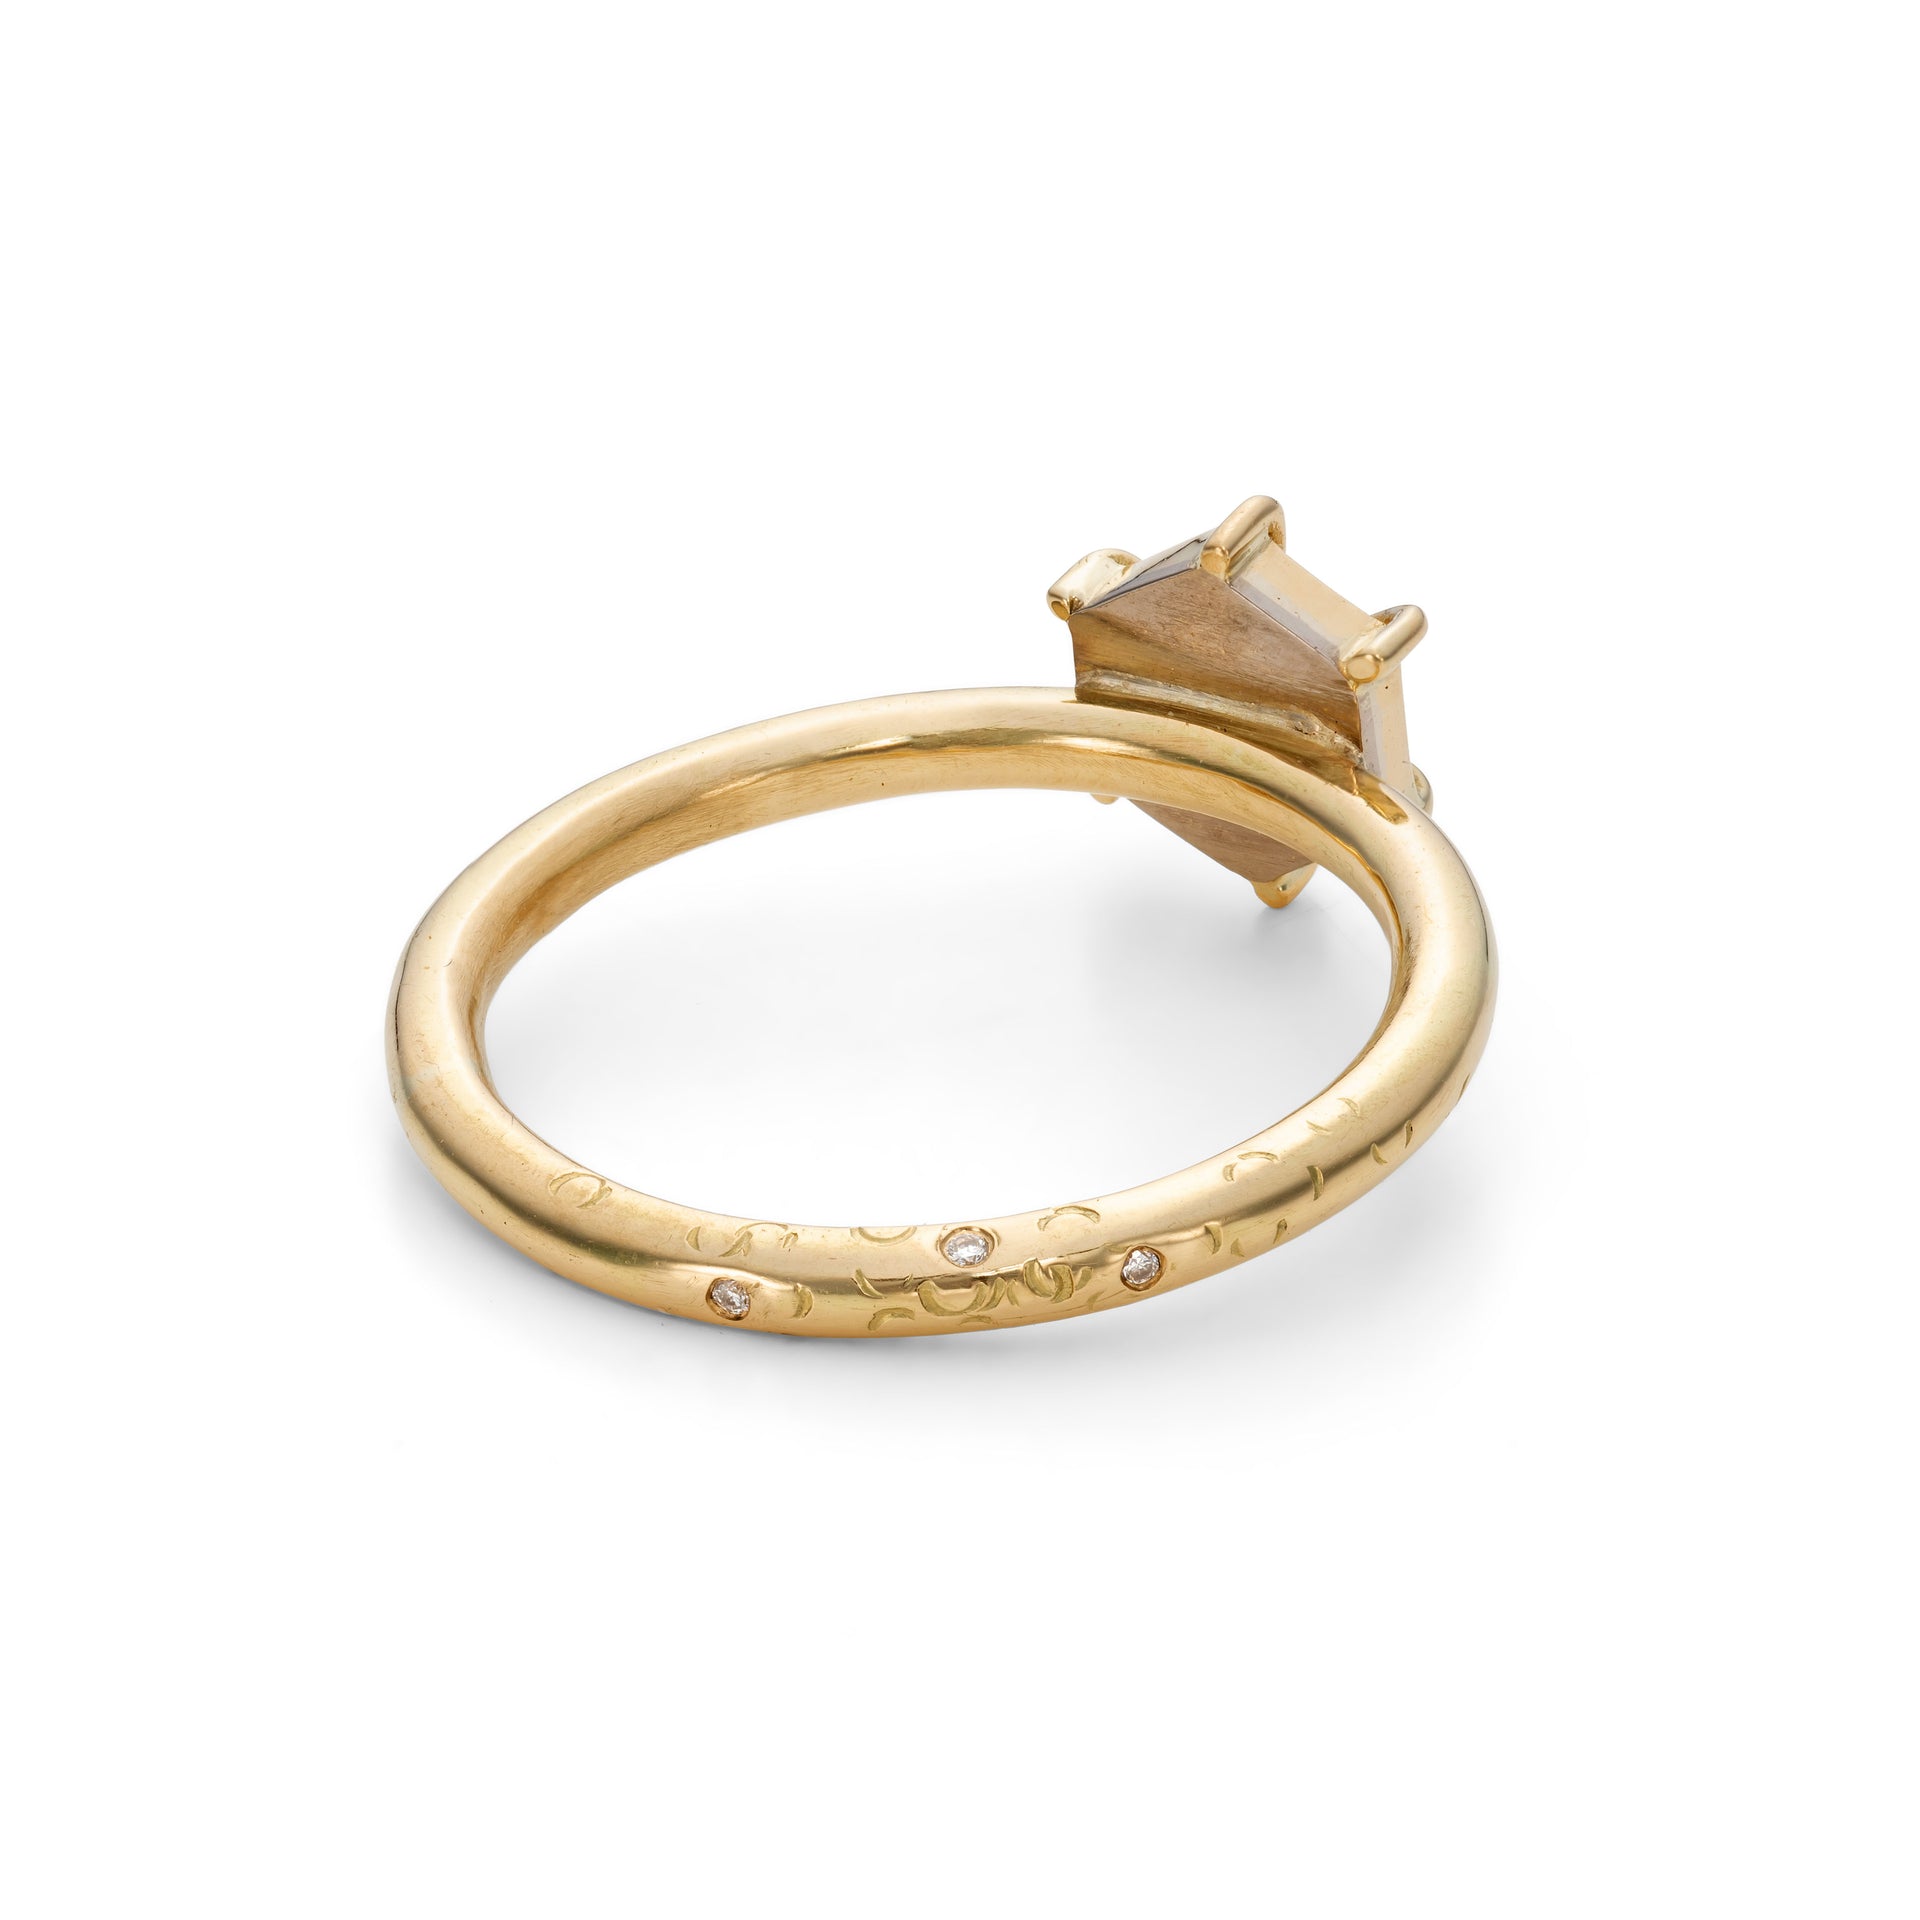 Starry Night diamond solitaire ring in 18ct recycled gold. Engagement ring one of a kind hexagon diamond ring by Corrinne Eira Evans